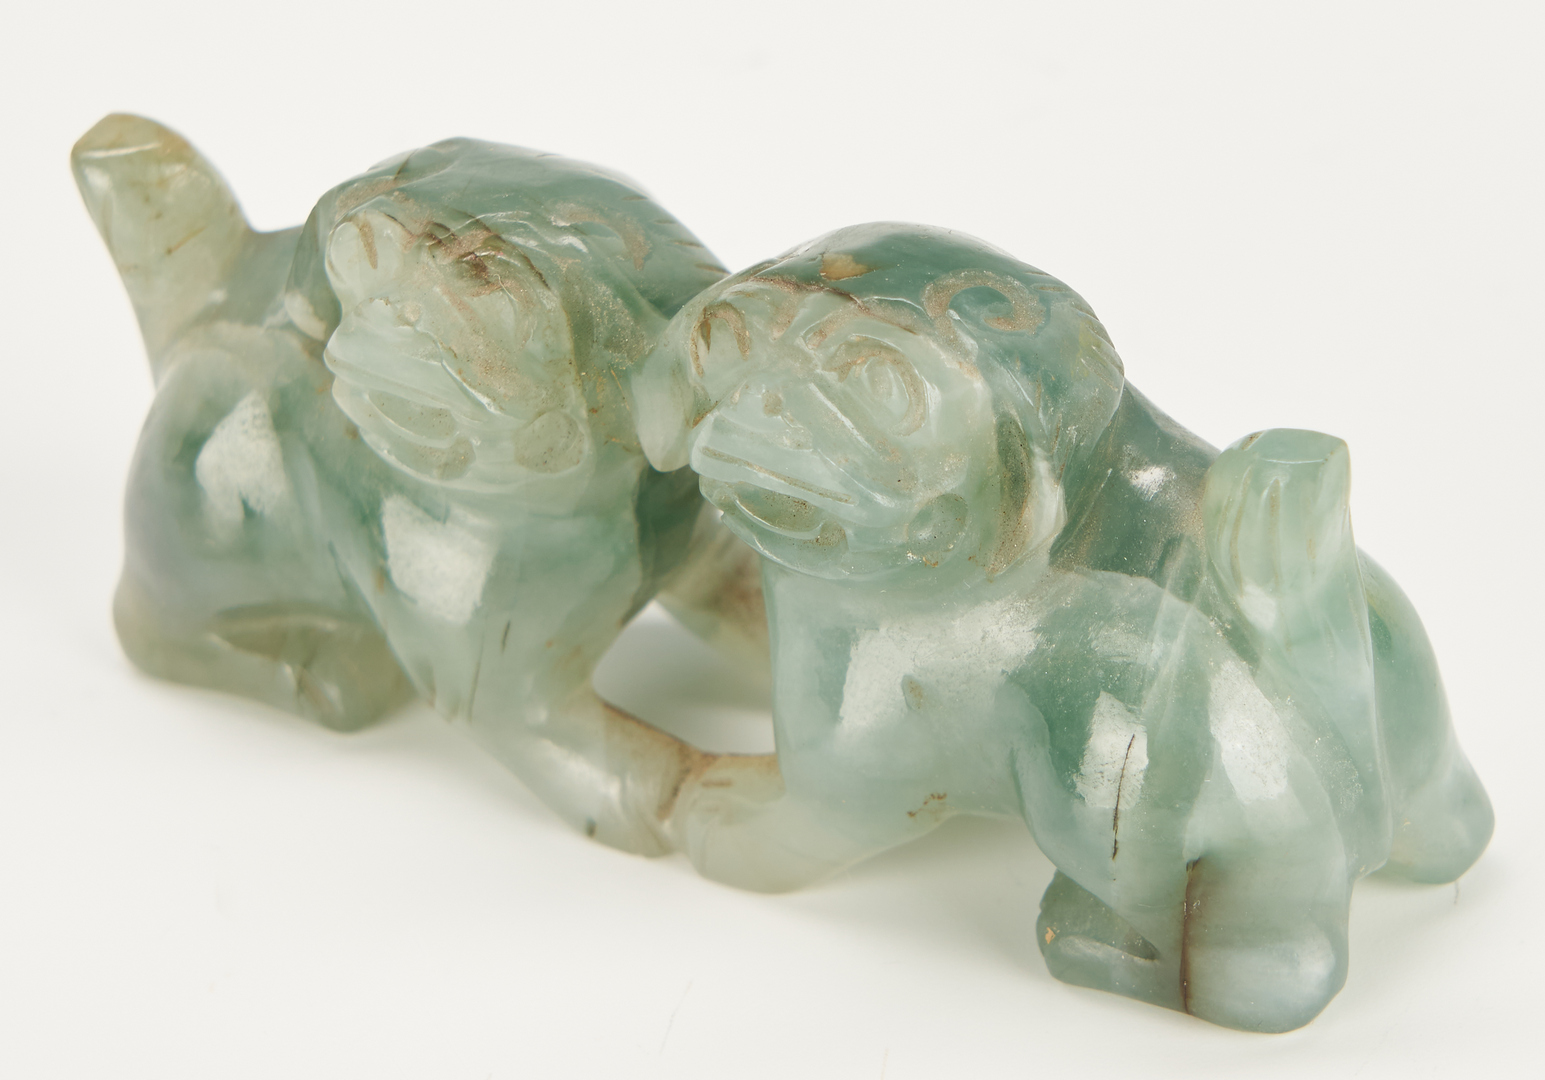 Lot 1090: 5 Chinese Carved Jade & Hardstone Figural Items, incl. Seals